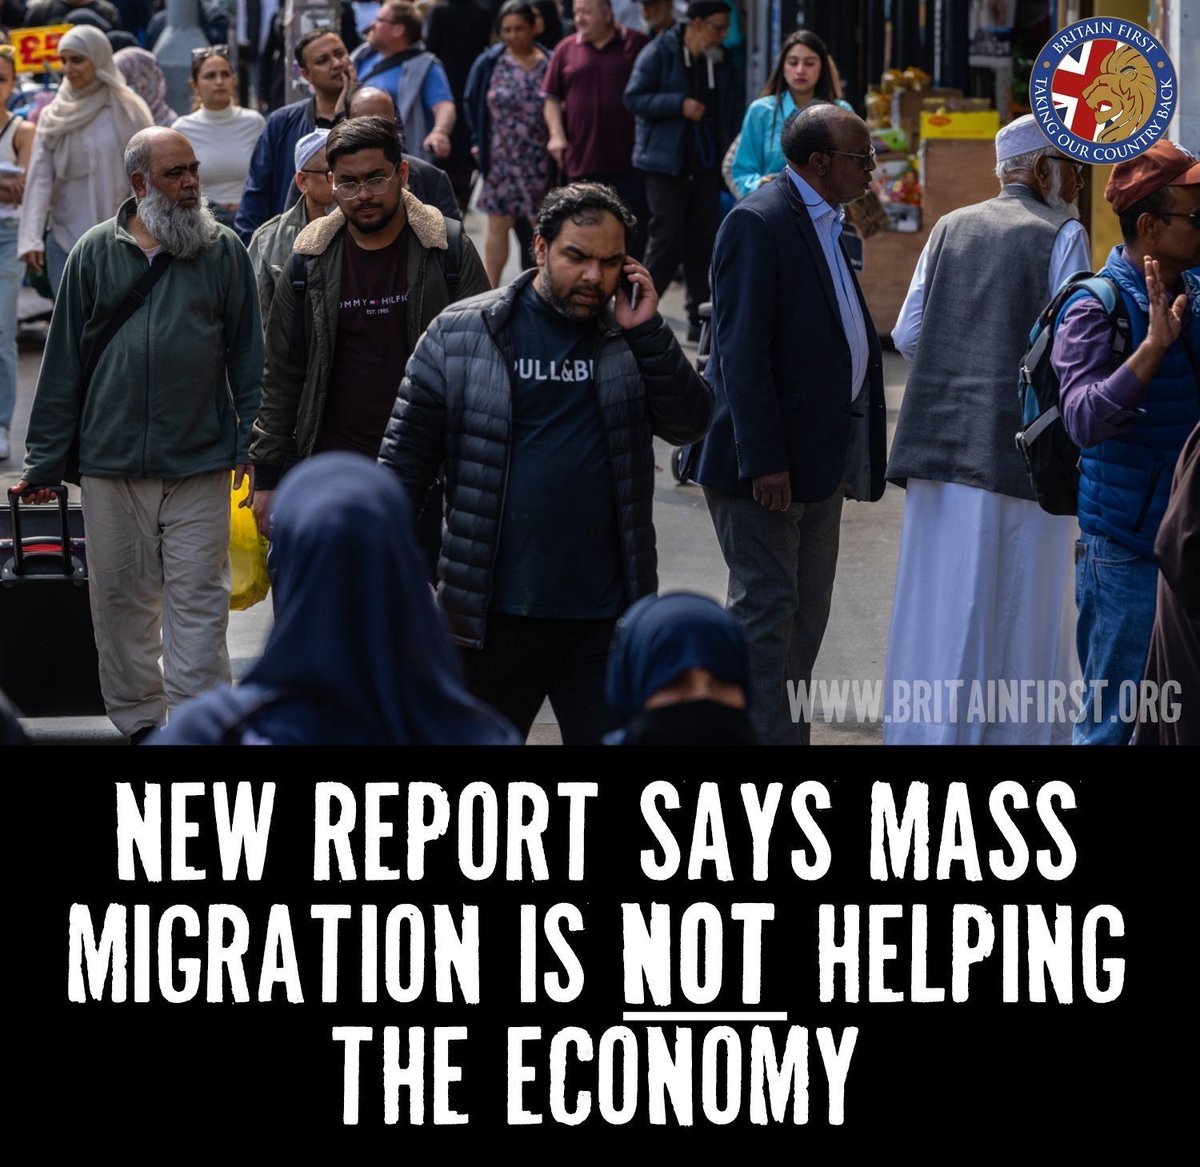 No shit, they come, they take, they replace. The UK will soon be a Middle Eastern slum dependent on foreign aid because it f*cked itself with foreigners.